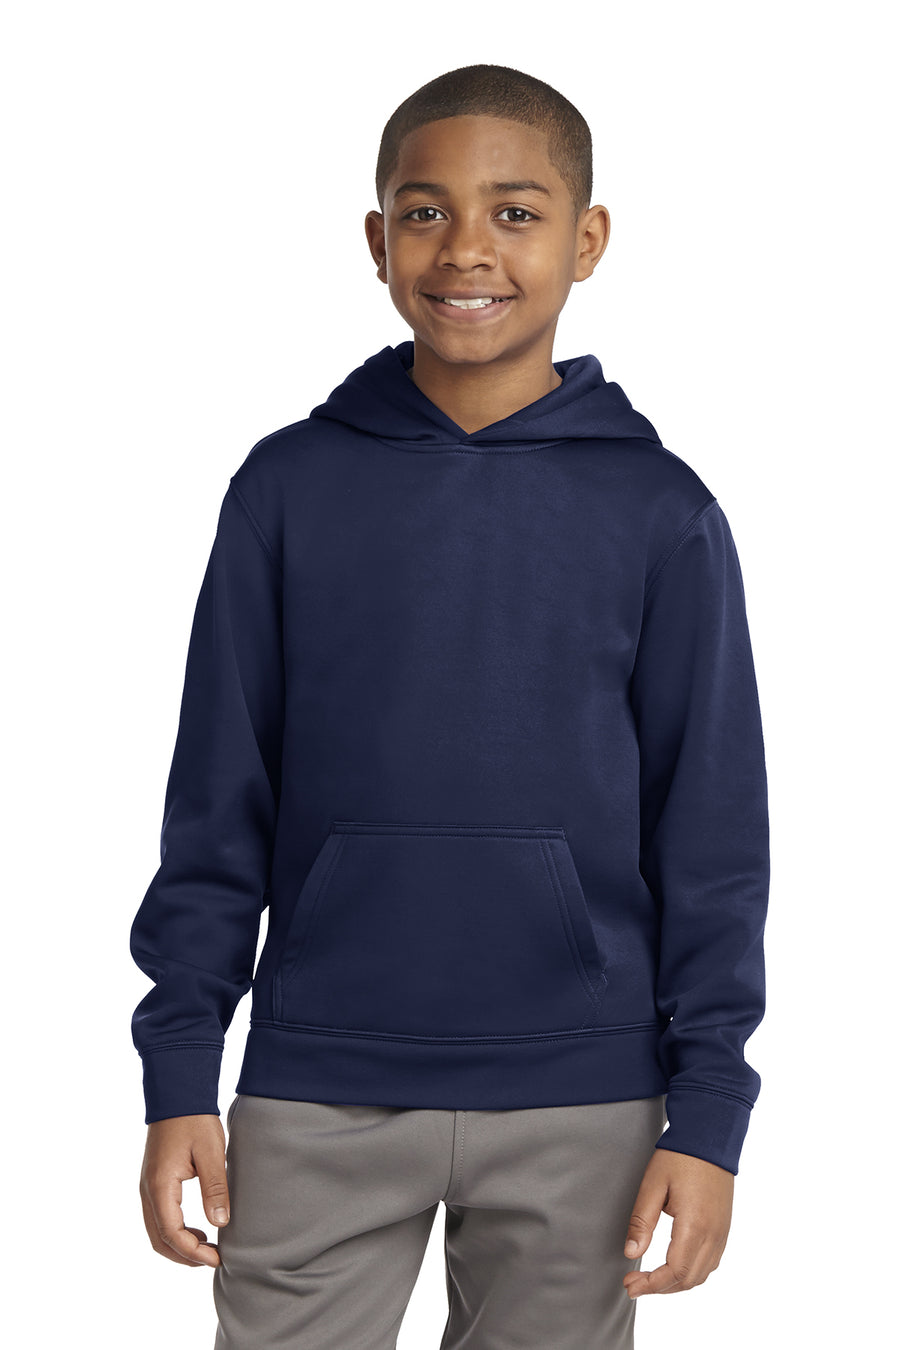 Youth Sport Fleece Hooded Pullover